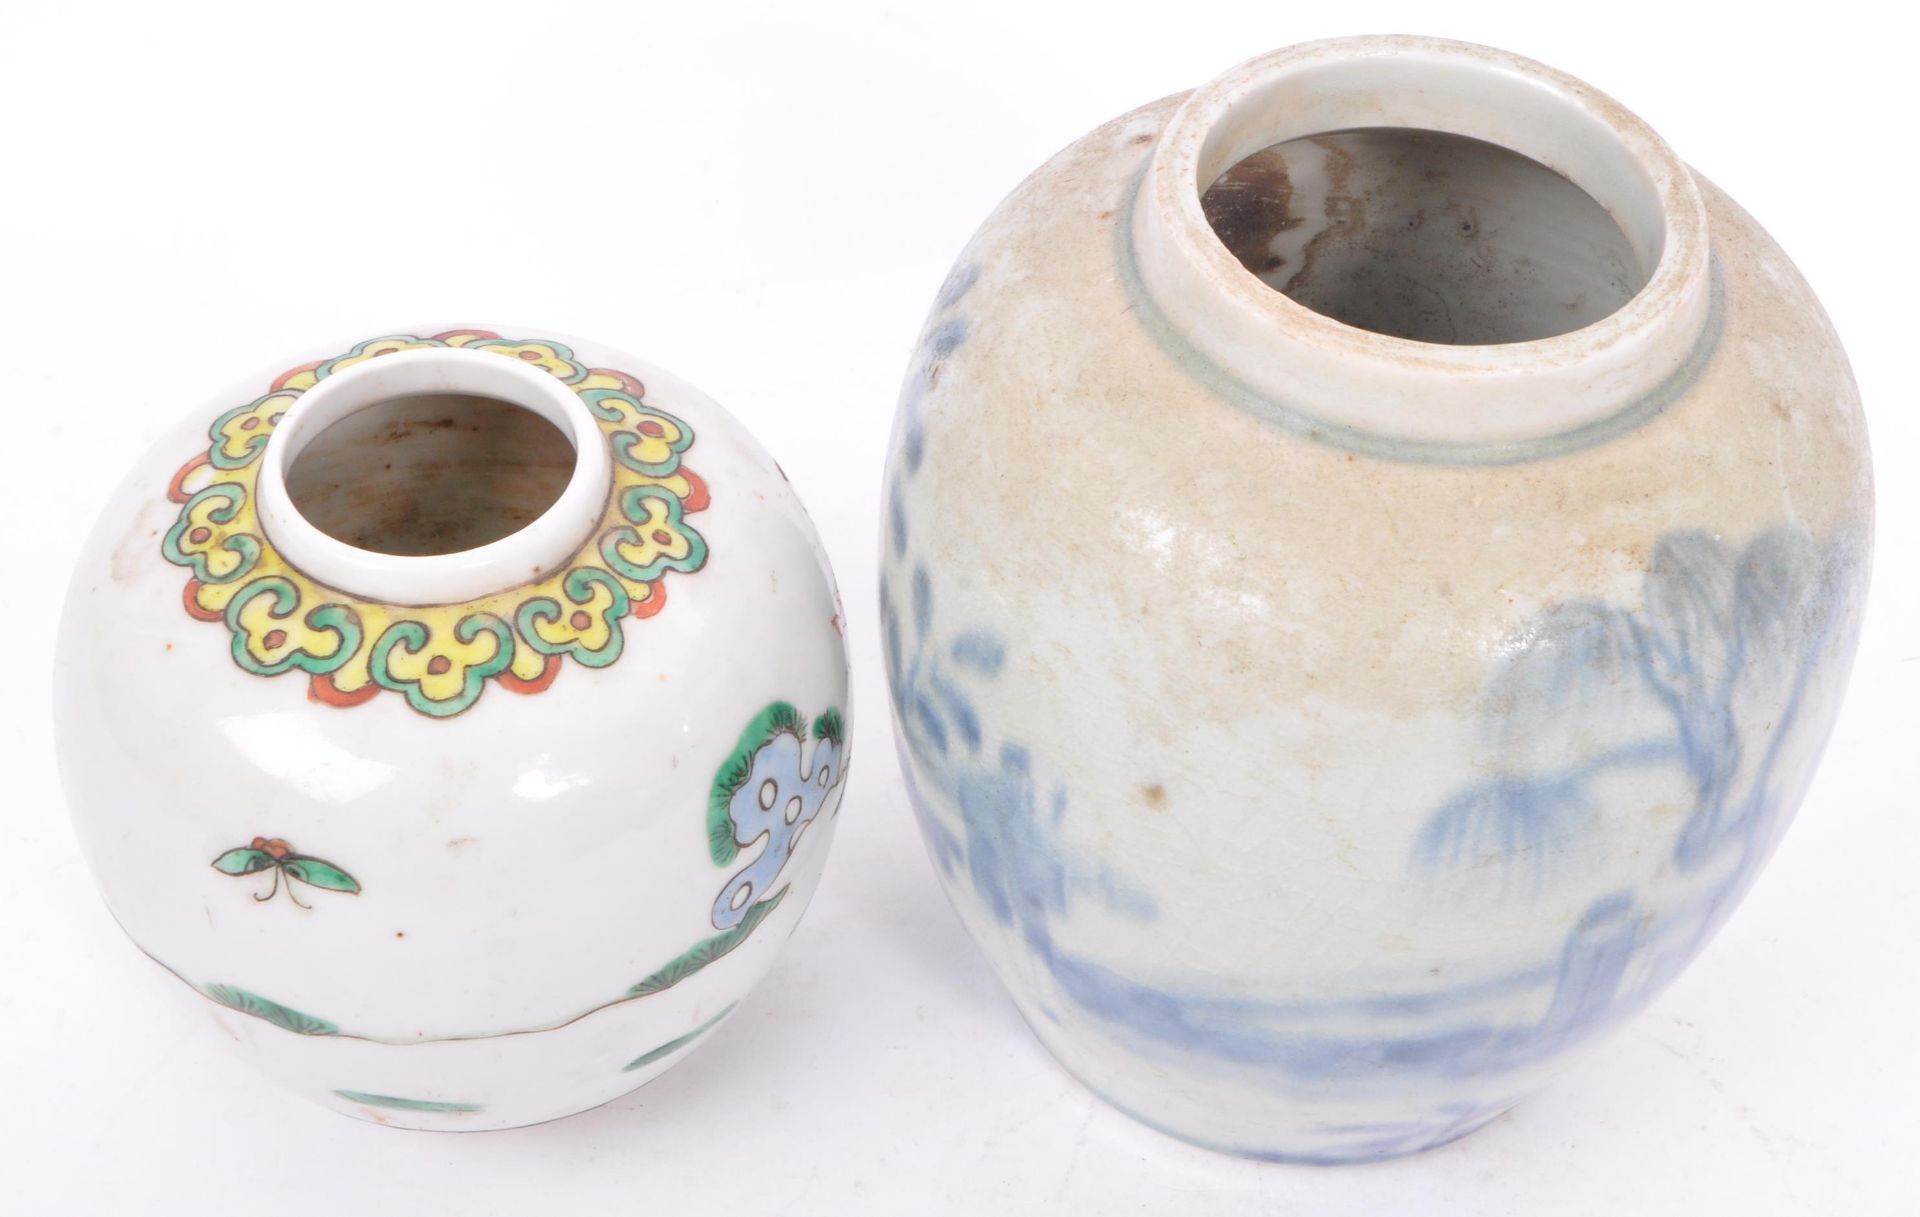 COLLECTION OF 19TH CENTURY CHINESE PORCELAIN GINGER JARS - Image 7 of 8